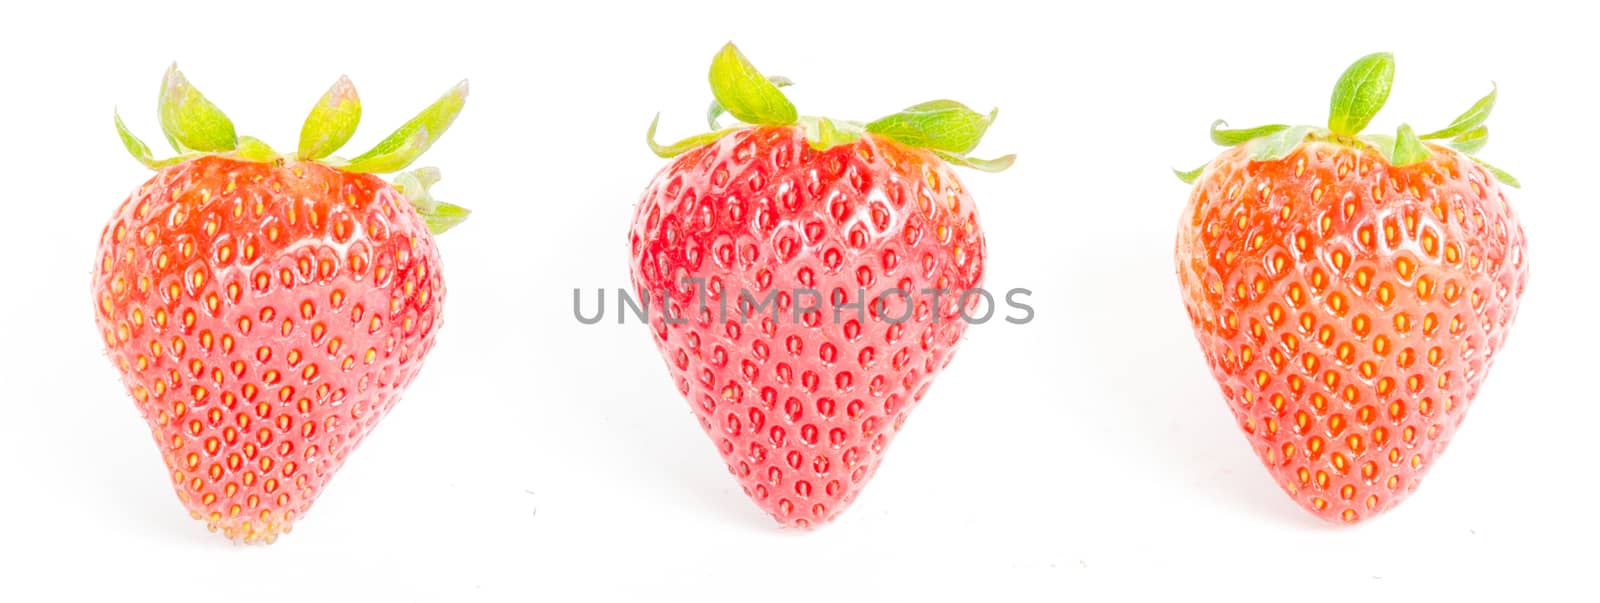 Row of three fresh strawberries isolated on white background. Organic red berry with clipping path and copy space